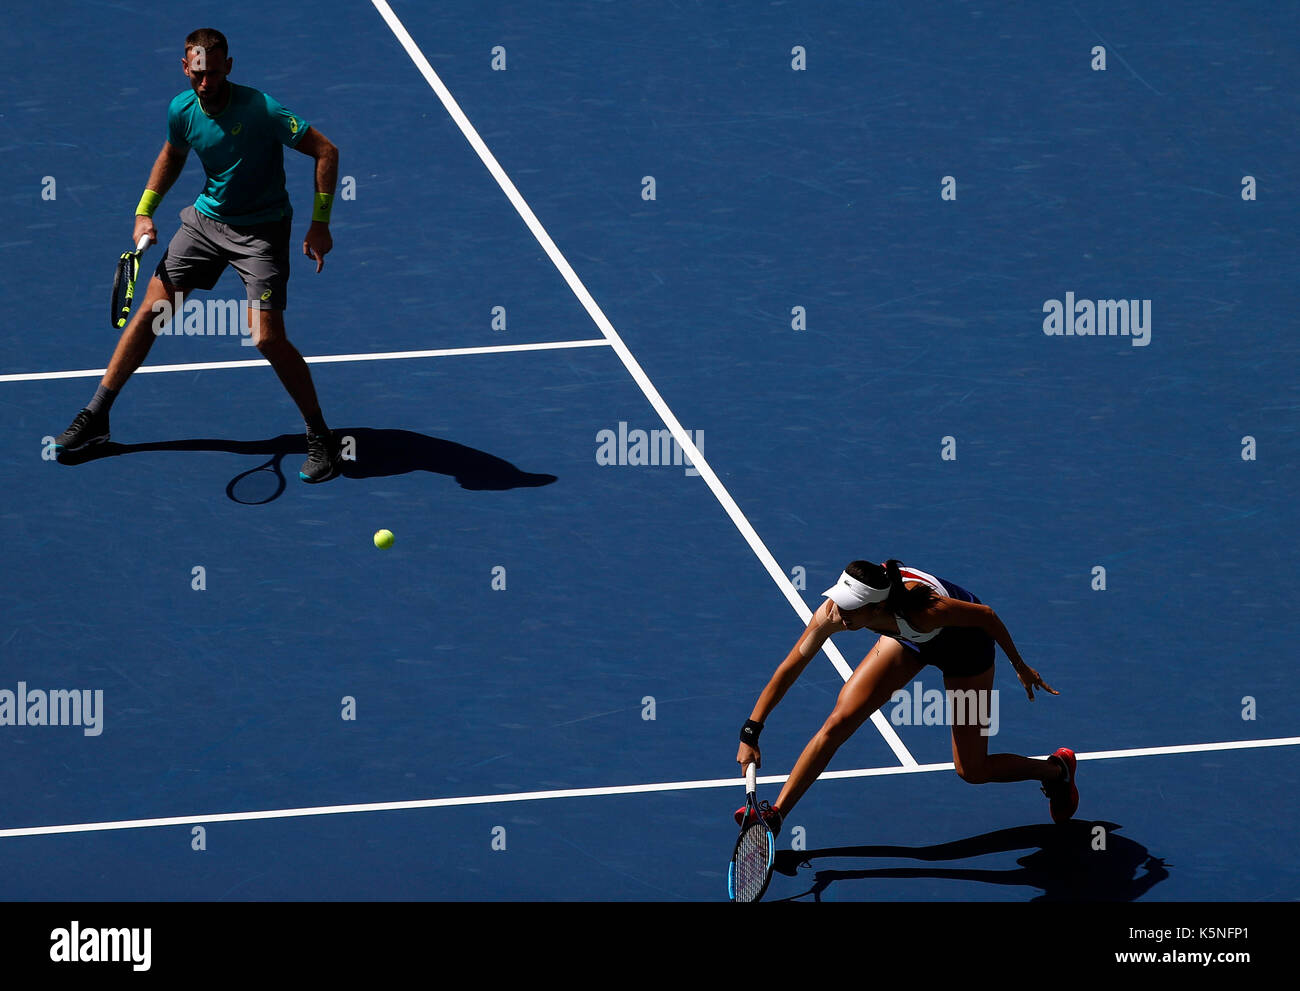 New York, USA. 9th Sep, 2017. Hao-Ching Chan (R) of Chinese Taipei and Michael Venus of New Zealand compete against Martina Hingis of Switzerland and Jamie Murray of Great Britain during the mixed doubles final match at the 2017 US Open in New York, the United States, Sept. 9, 2017. Martina Hingis and Jamie Murray won 2-1 to claim the title. Credit: Qin Lang/Xinhua/Alamy Live News Stock Photo